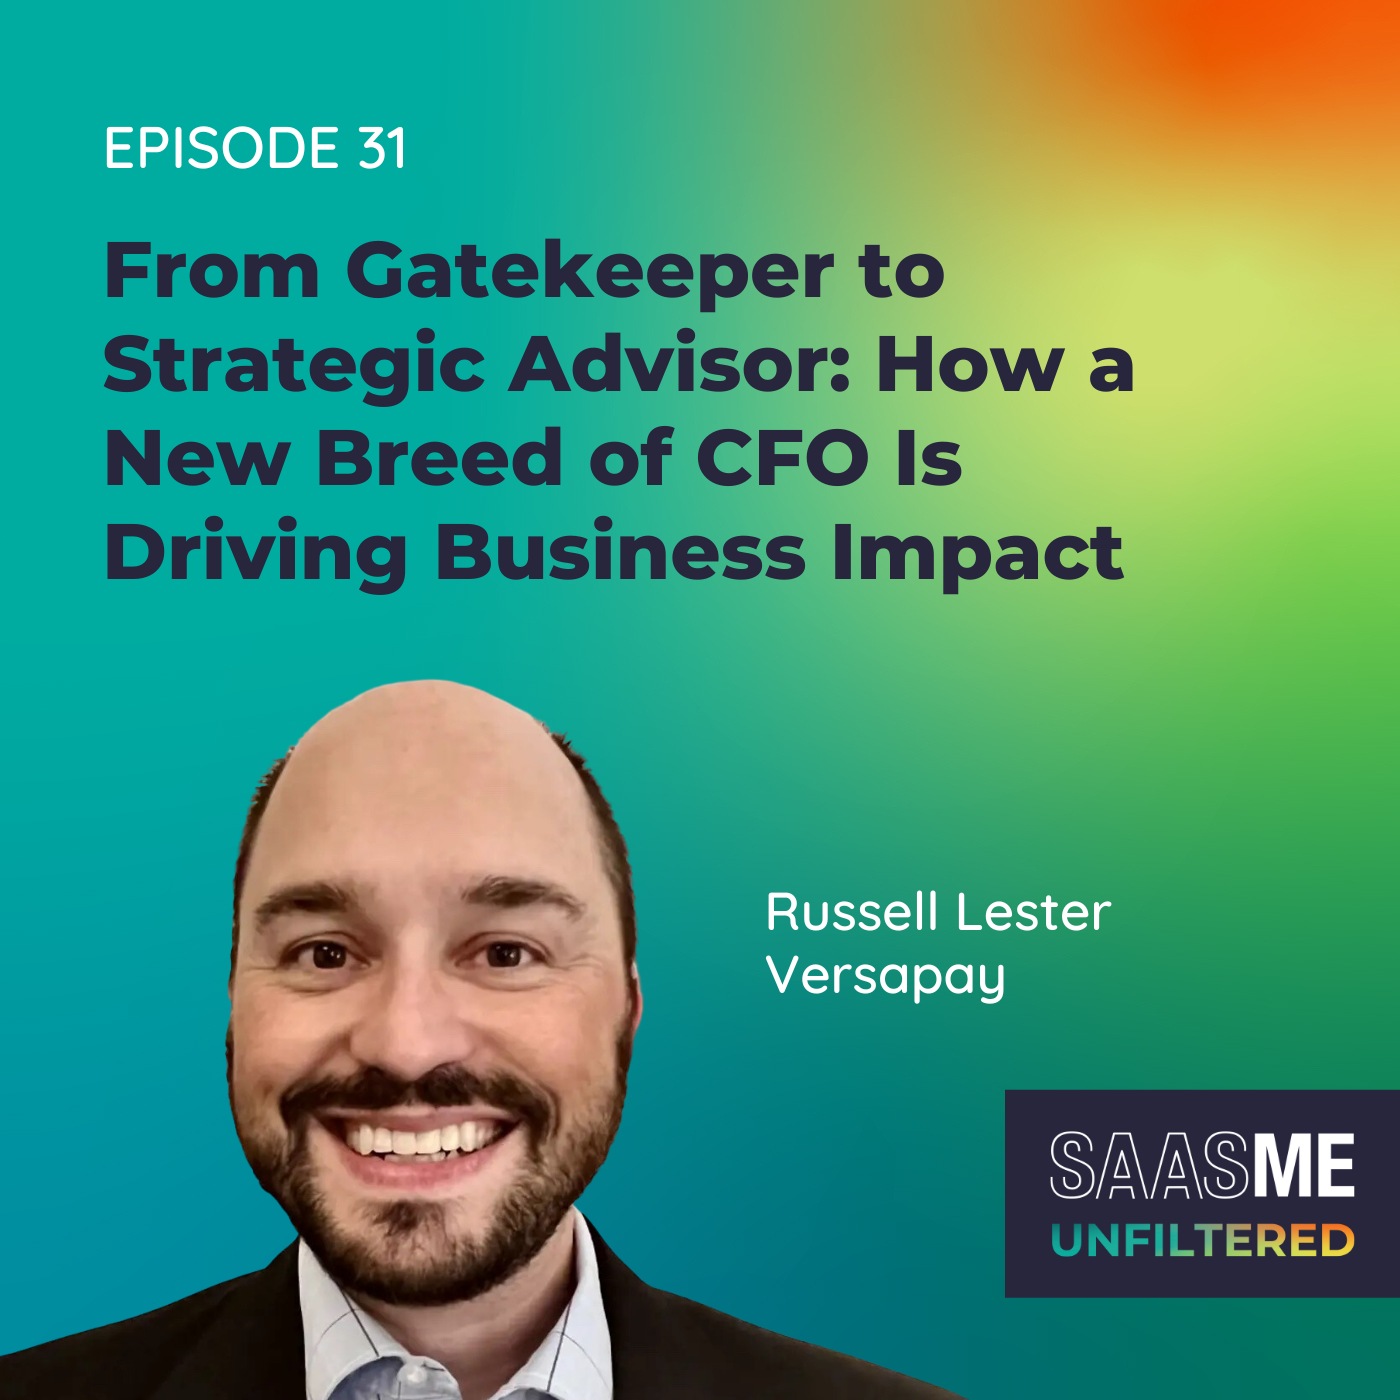 Russell Lester: From Gatekeeper to Strategic Advisor – How a New Breed of CFO Is Driving Business Impact